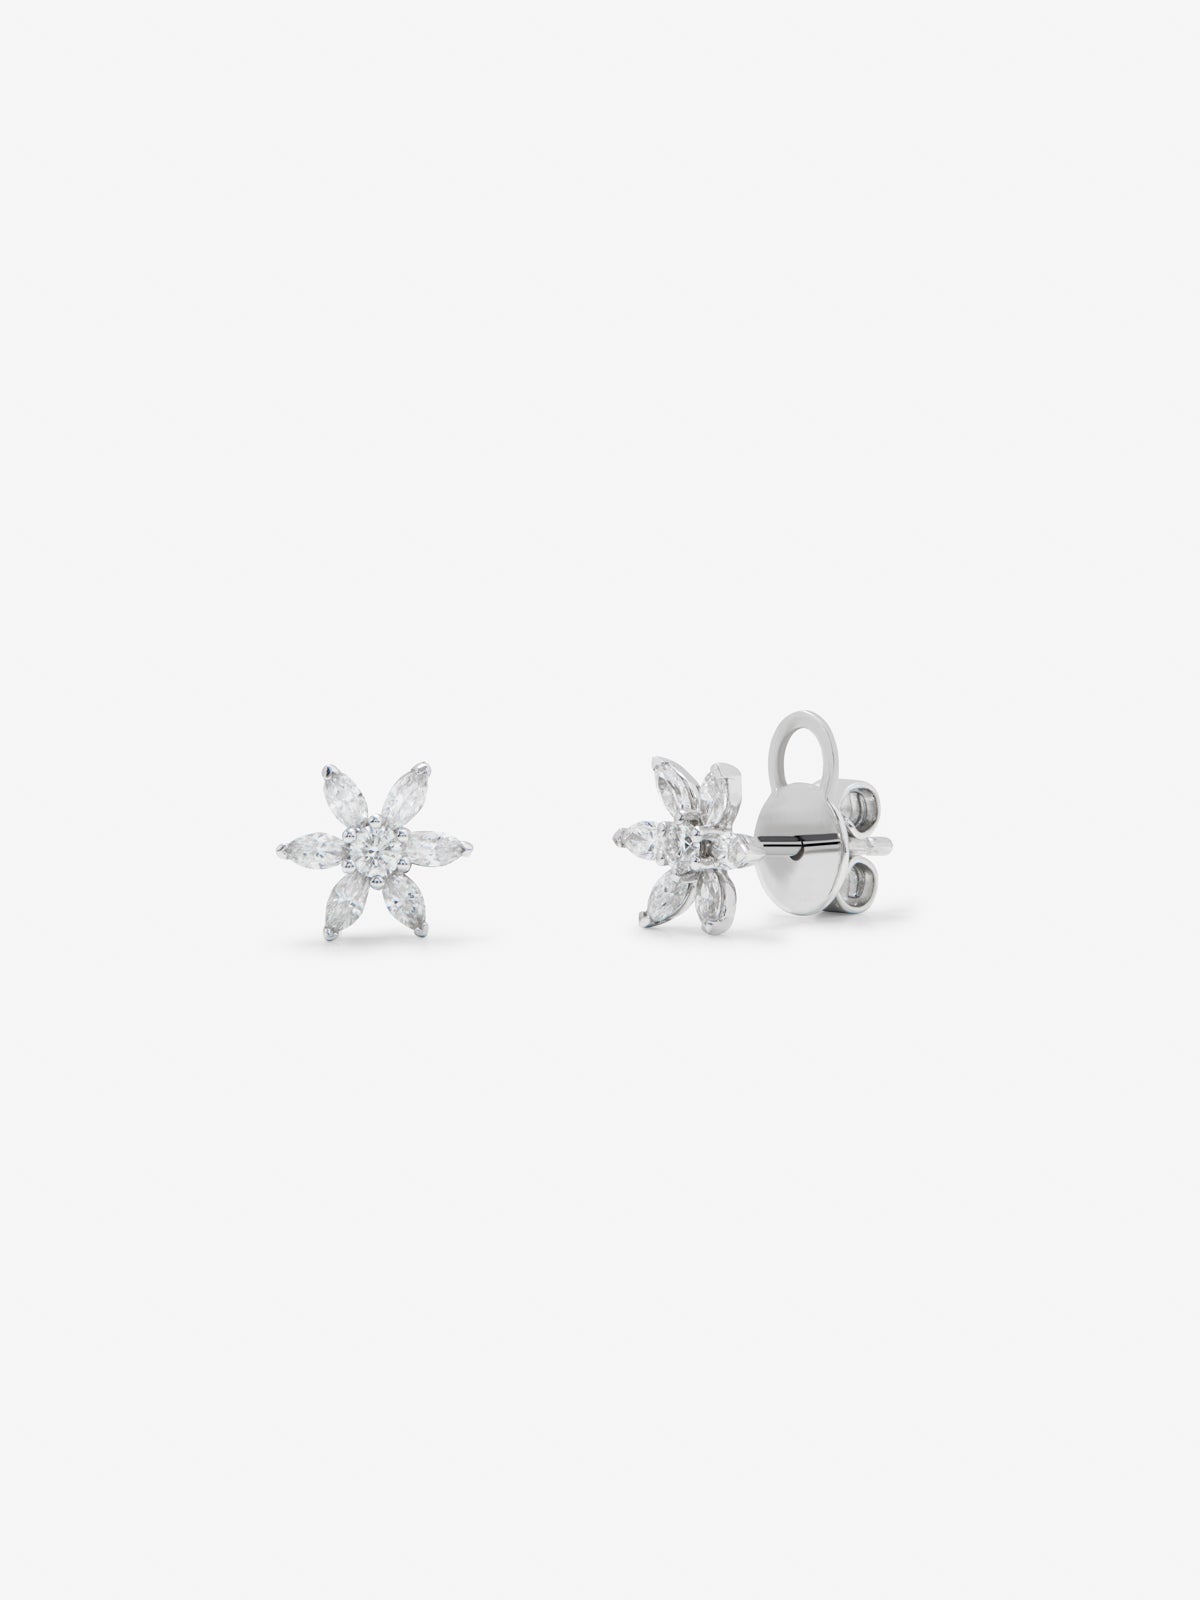 18K white gold earrings with 0.41 ct diamonds and flower shape